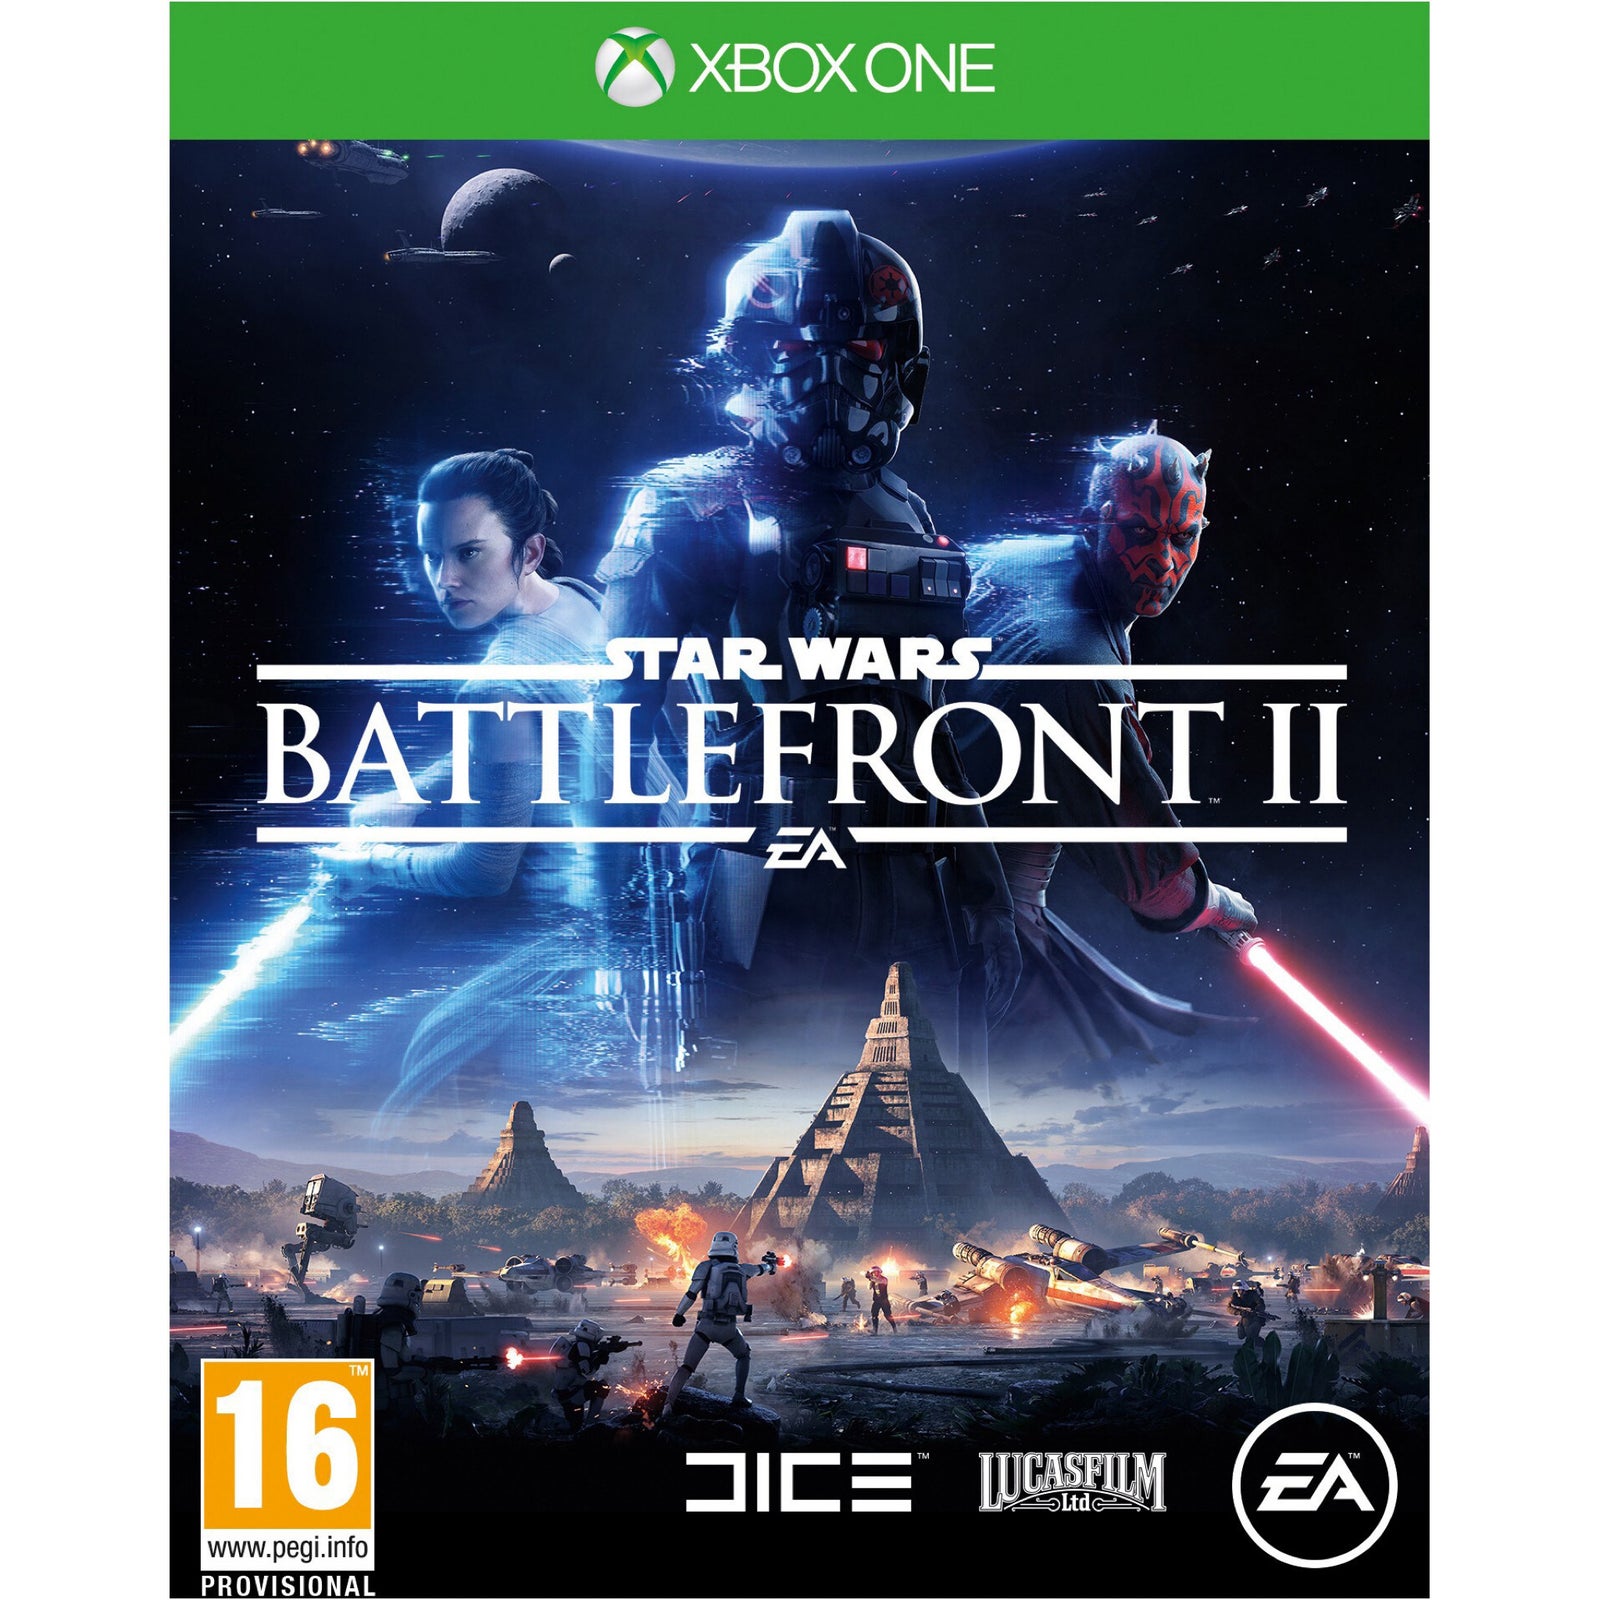 Xbox One S, Xbox One S, med Star Wars Battlefront 2